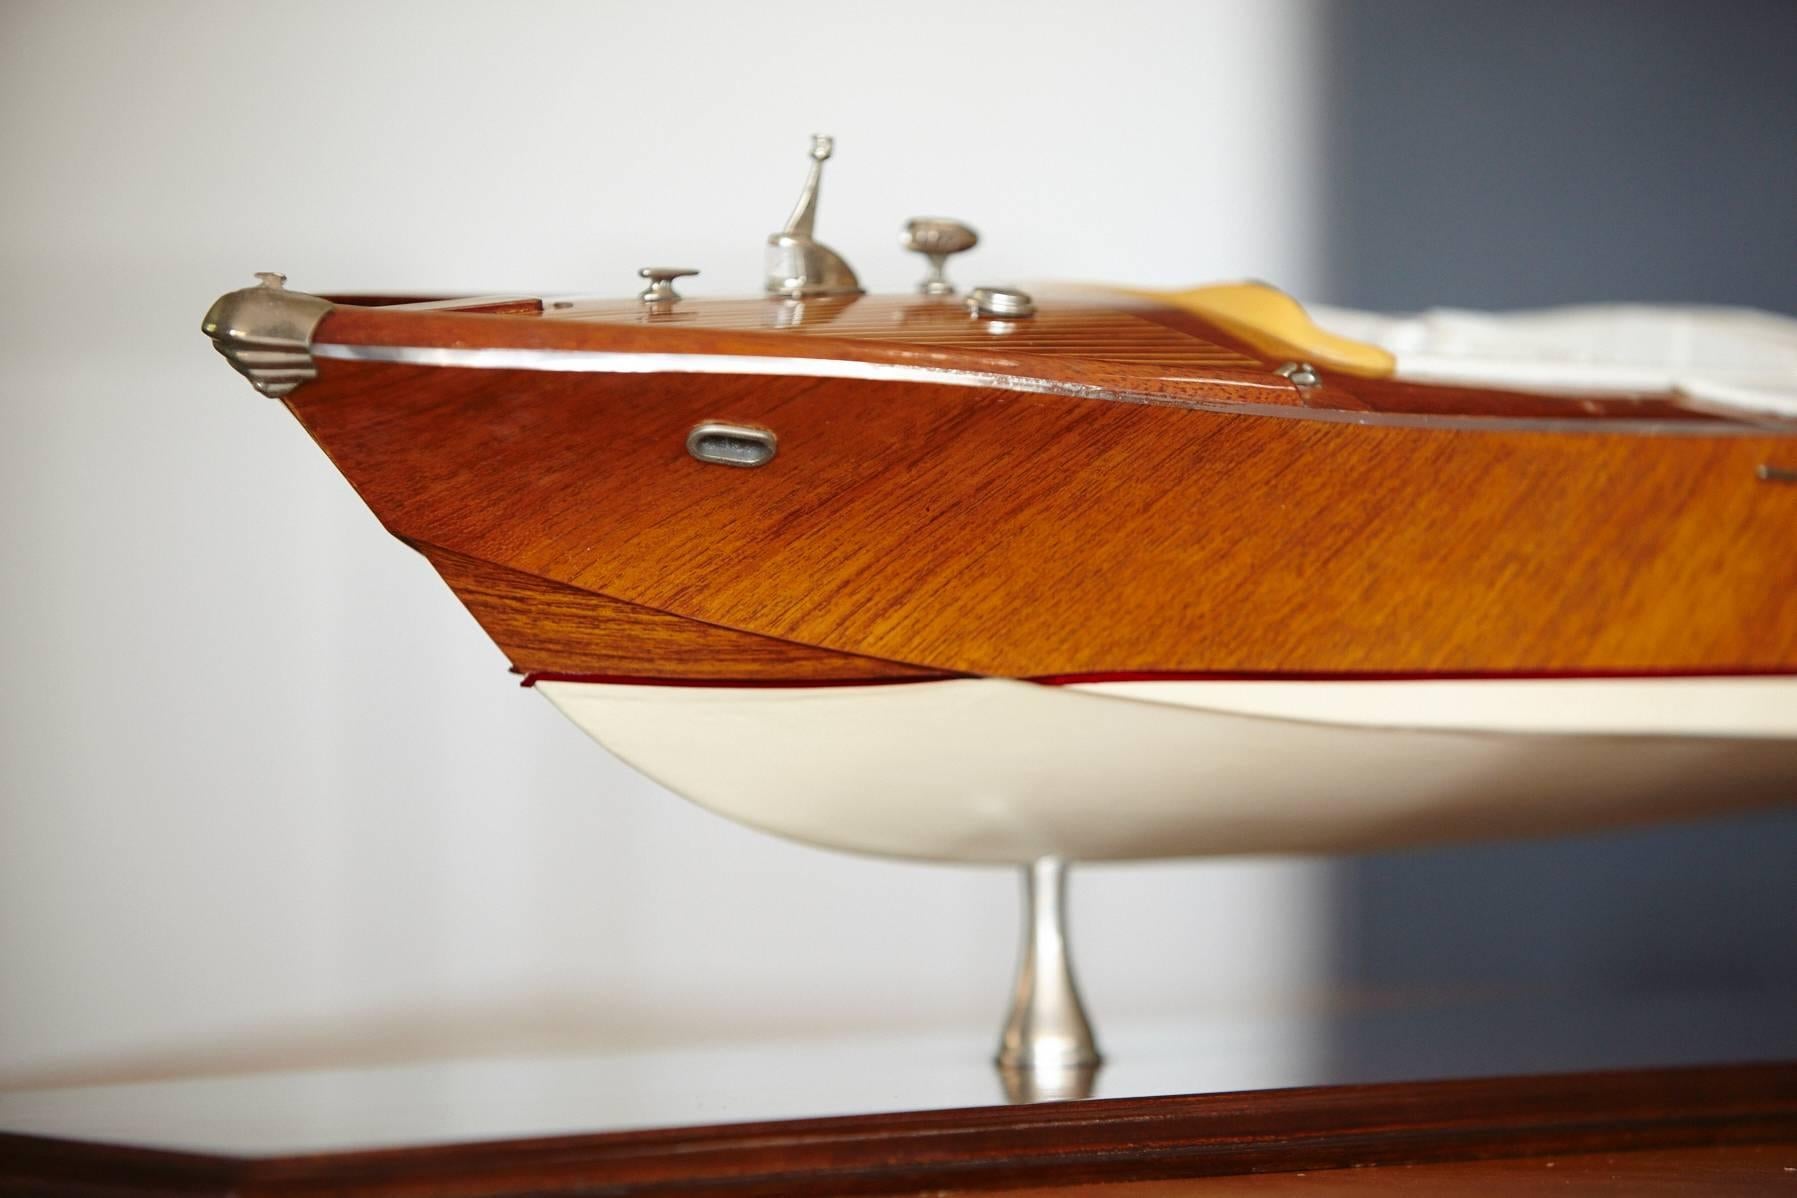 A really beautiful, detailed sport boat model in real mahogany with inlays.
Lots of chrome-plated, very detailed parts. The interior is complete upholstered in pleather and complete with wooden floor grid. Handmade in the 1960s.
Measurements boat: